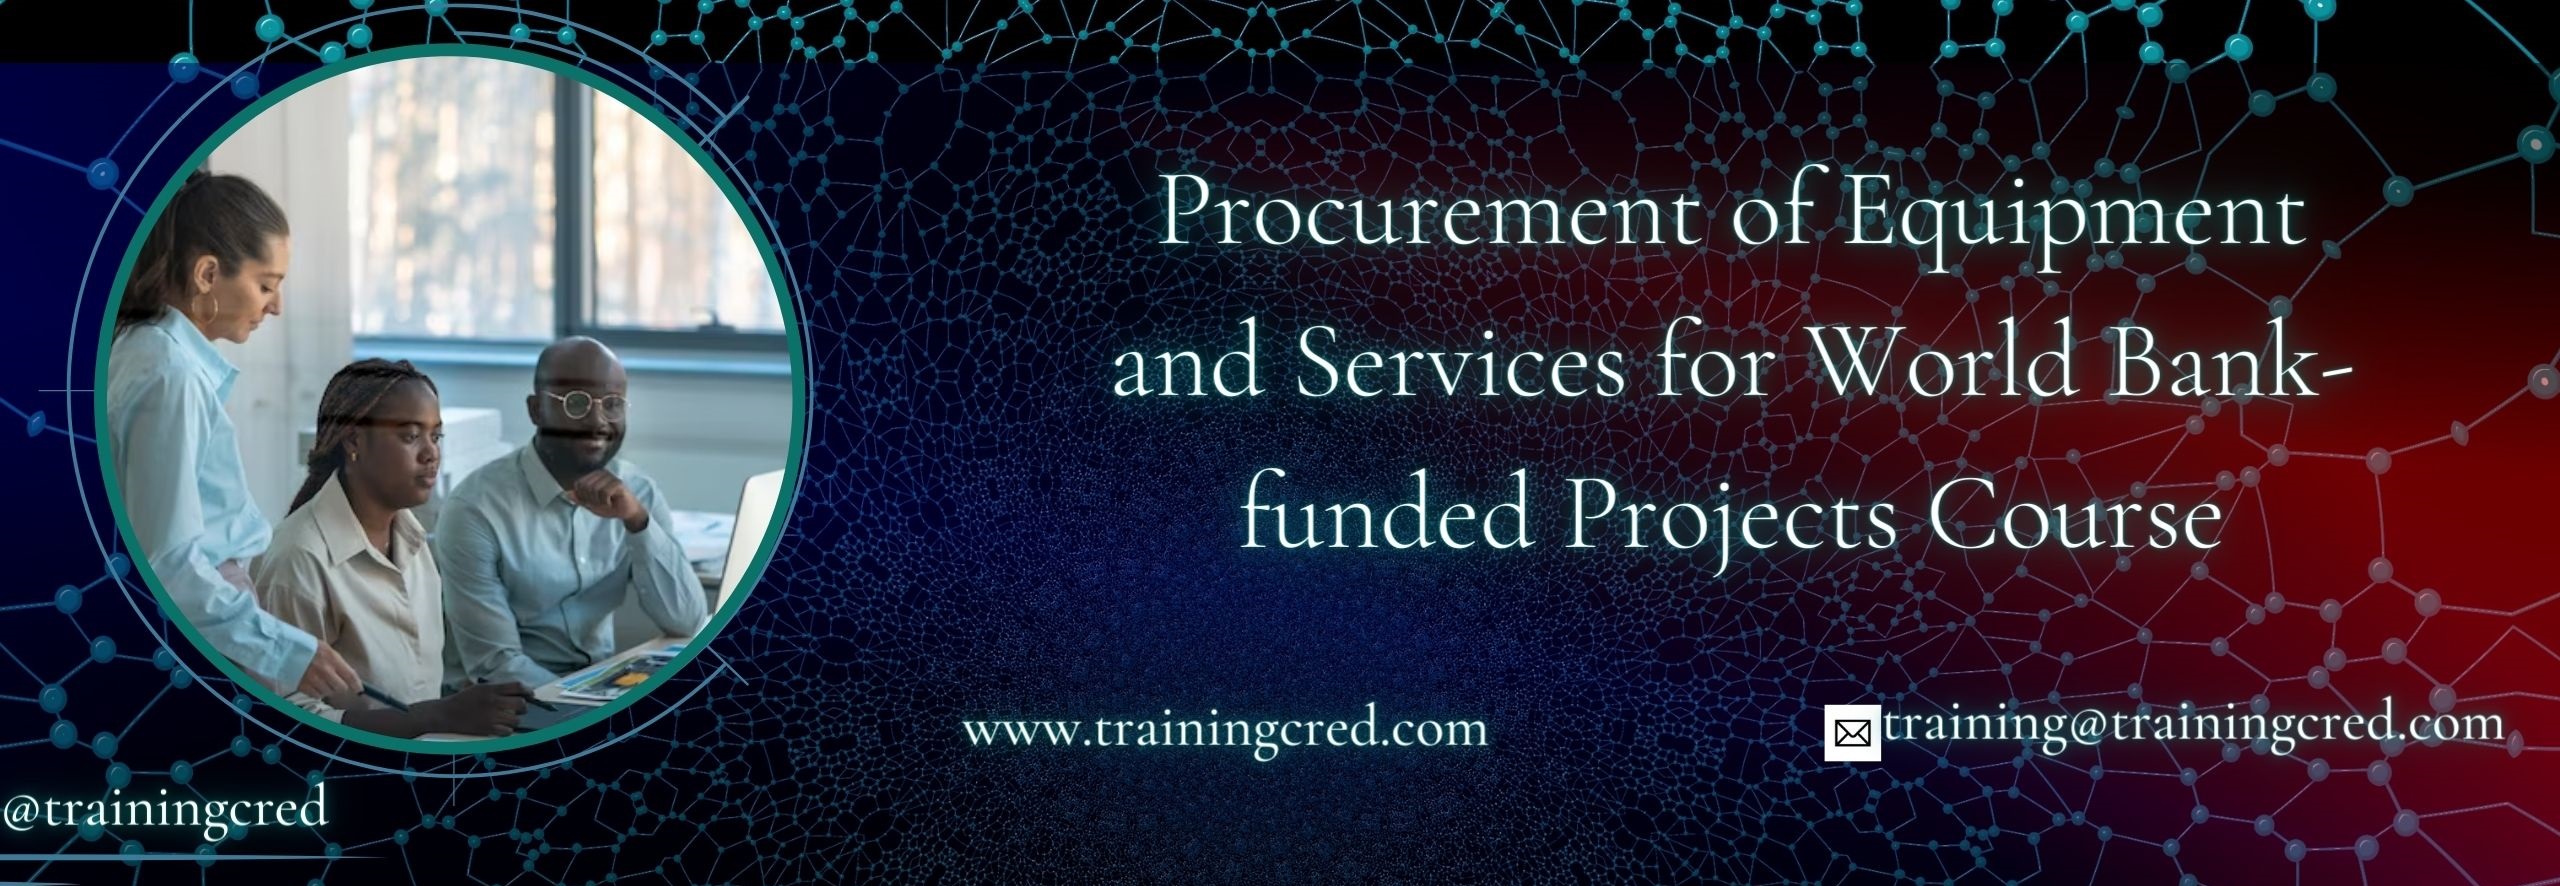 Procurement of Equipment and Services for World Bank-funded Projects